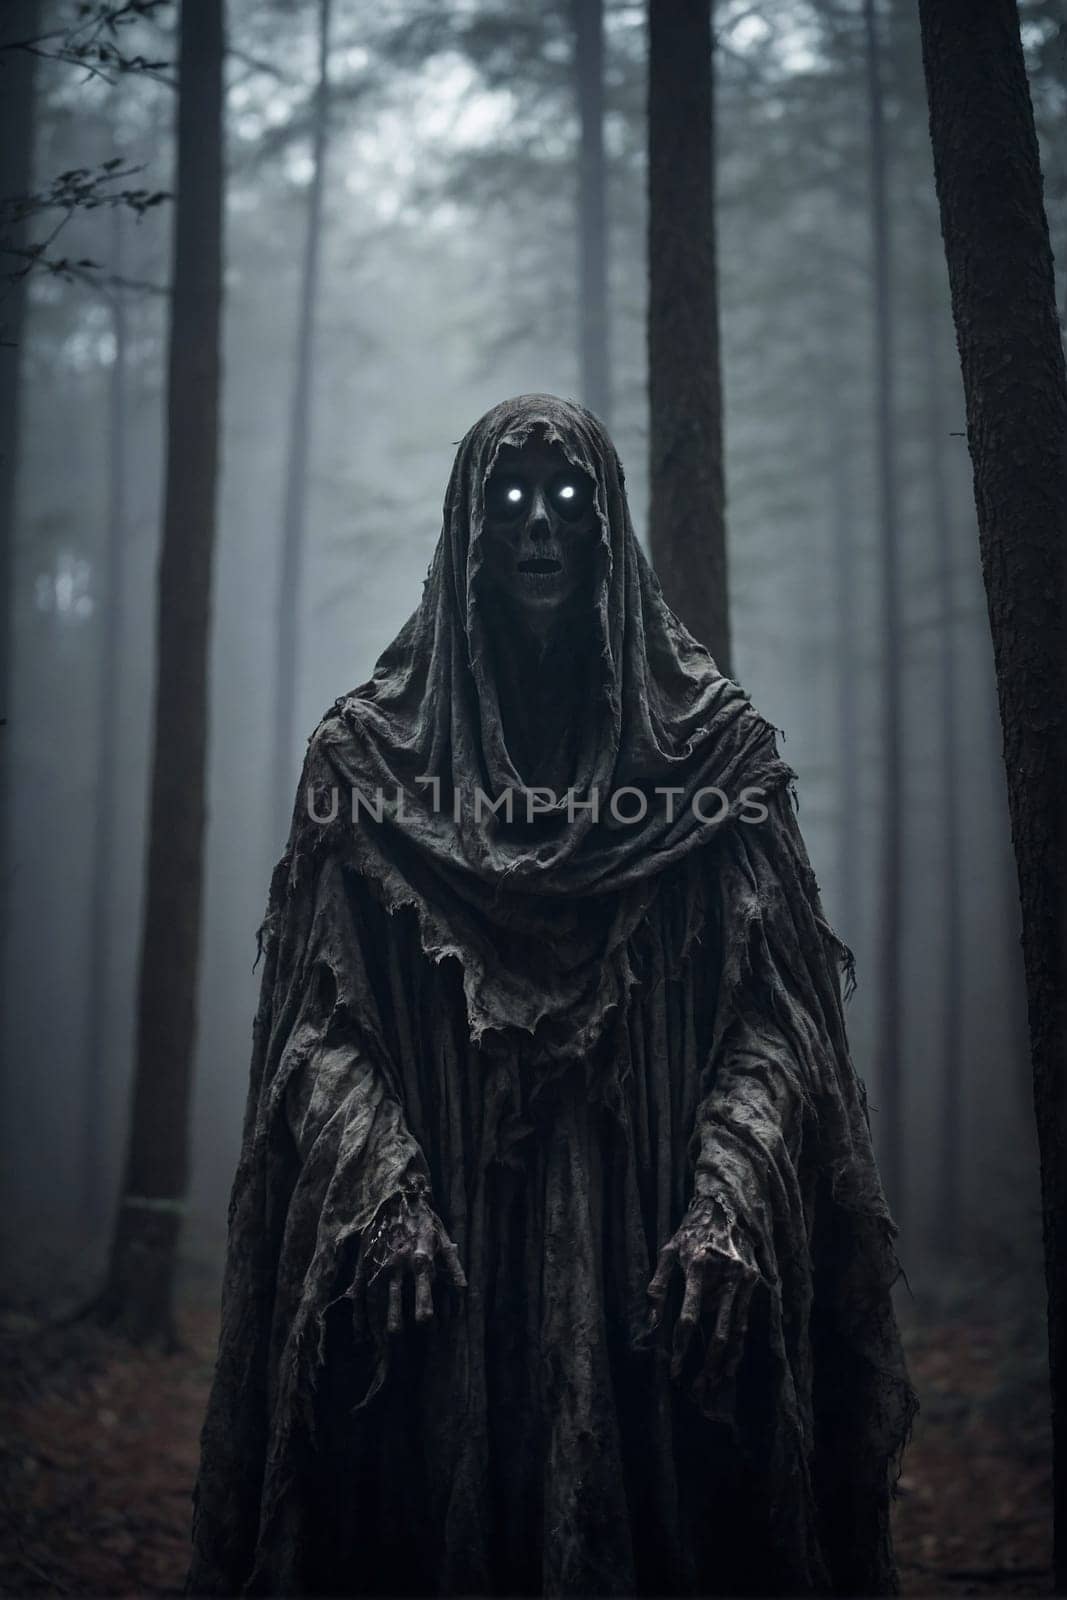 A man wearing a hooded cloak stands among the trees in a forest.